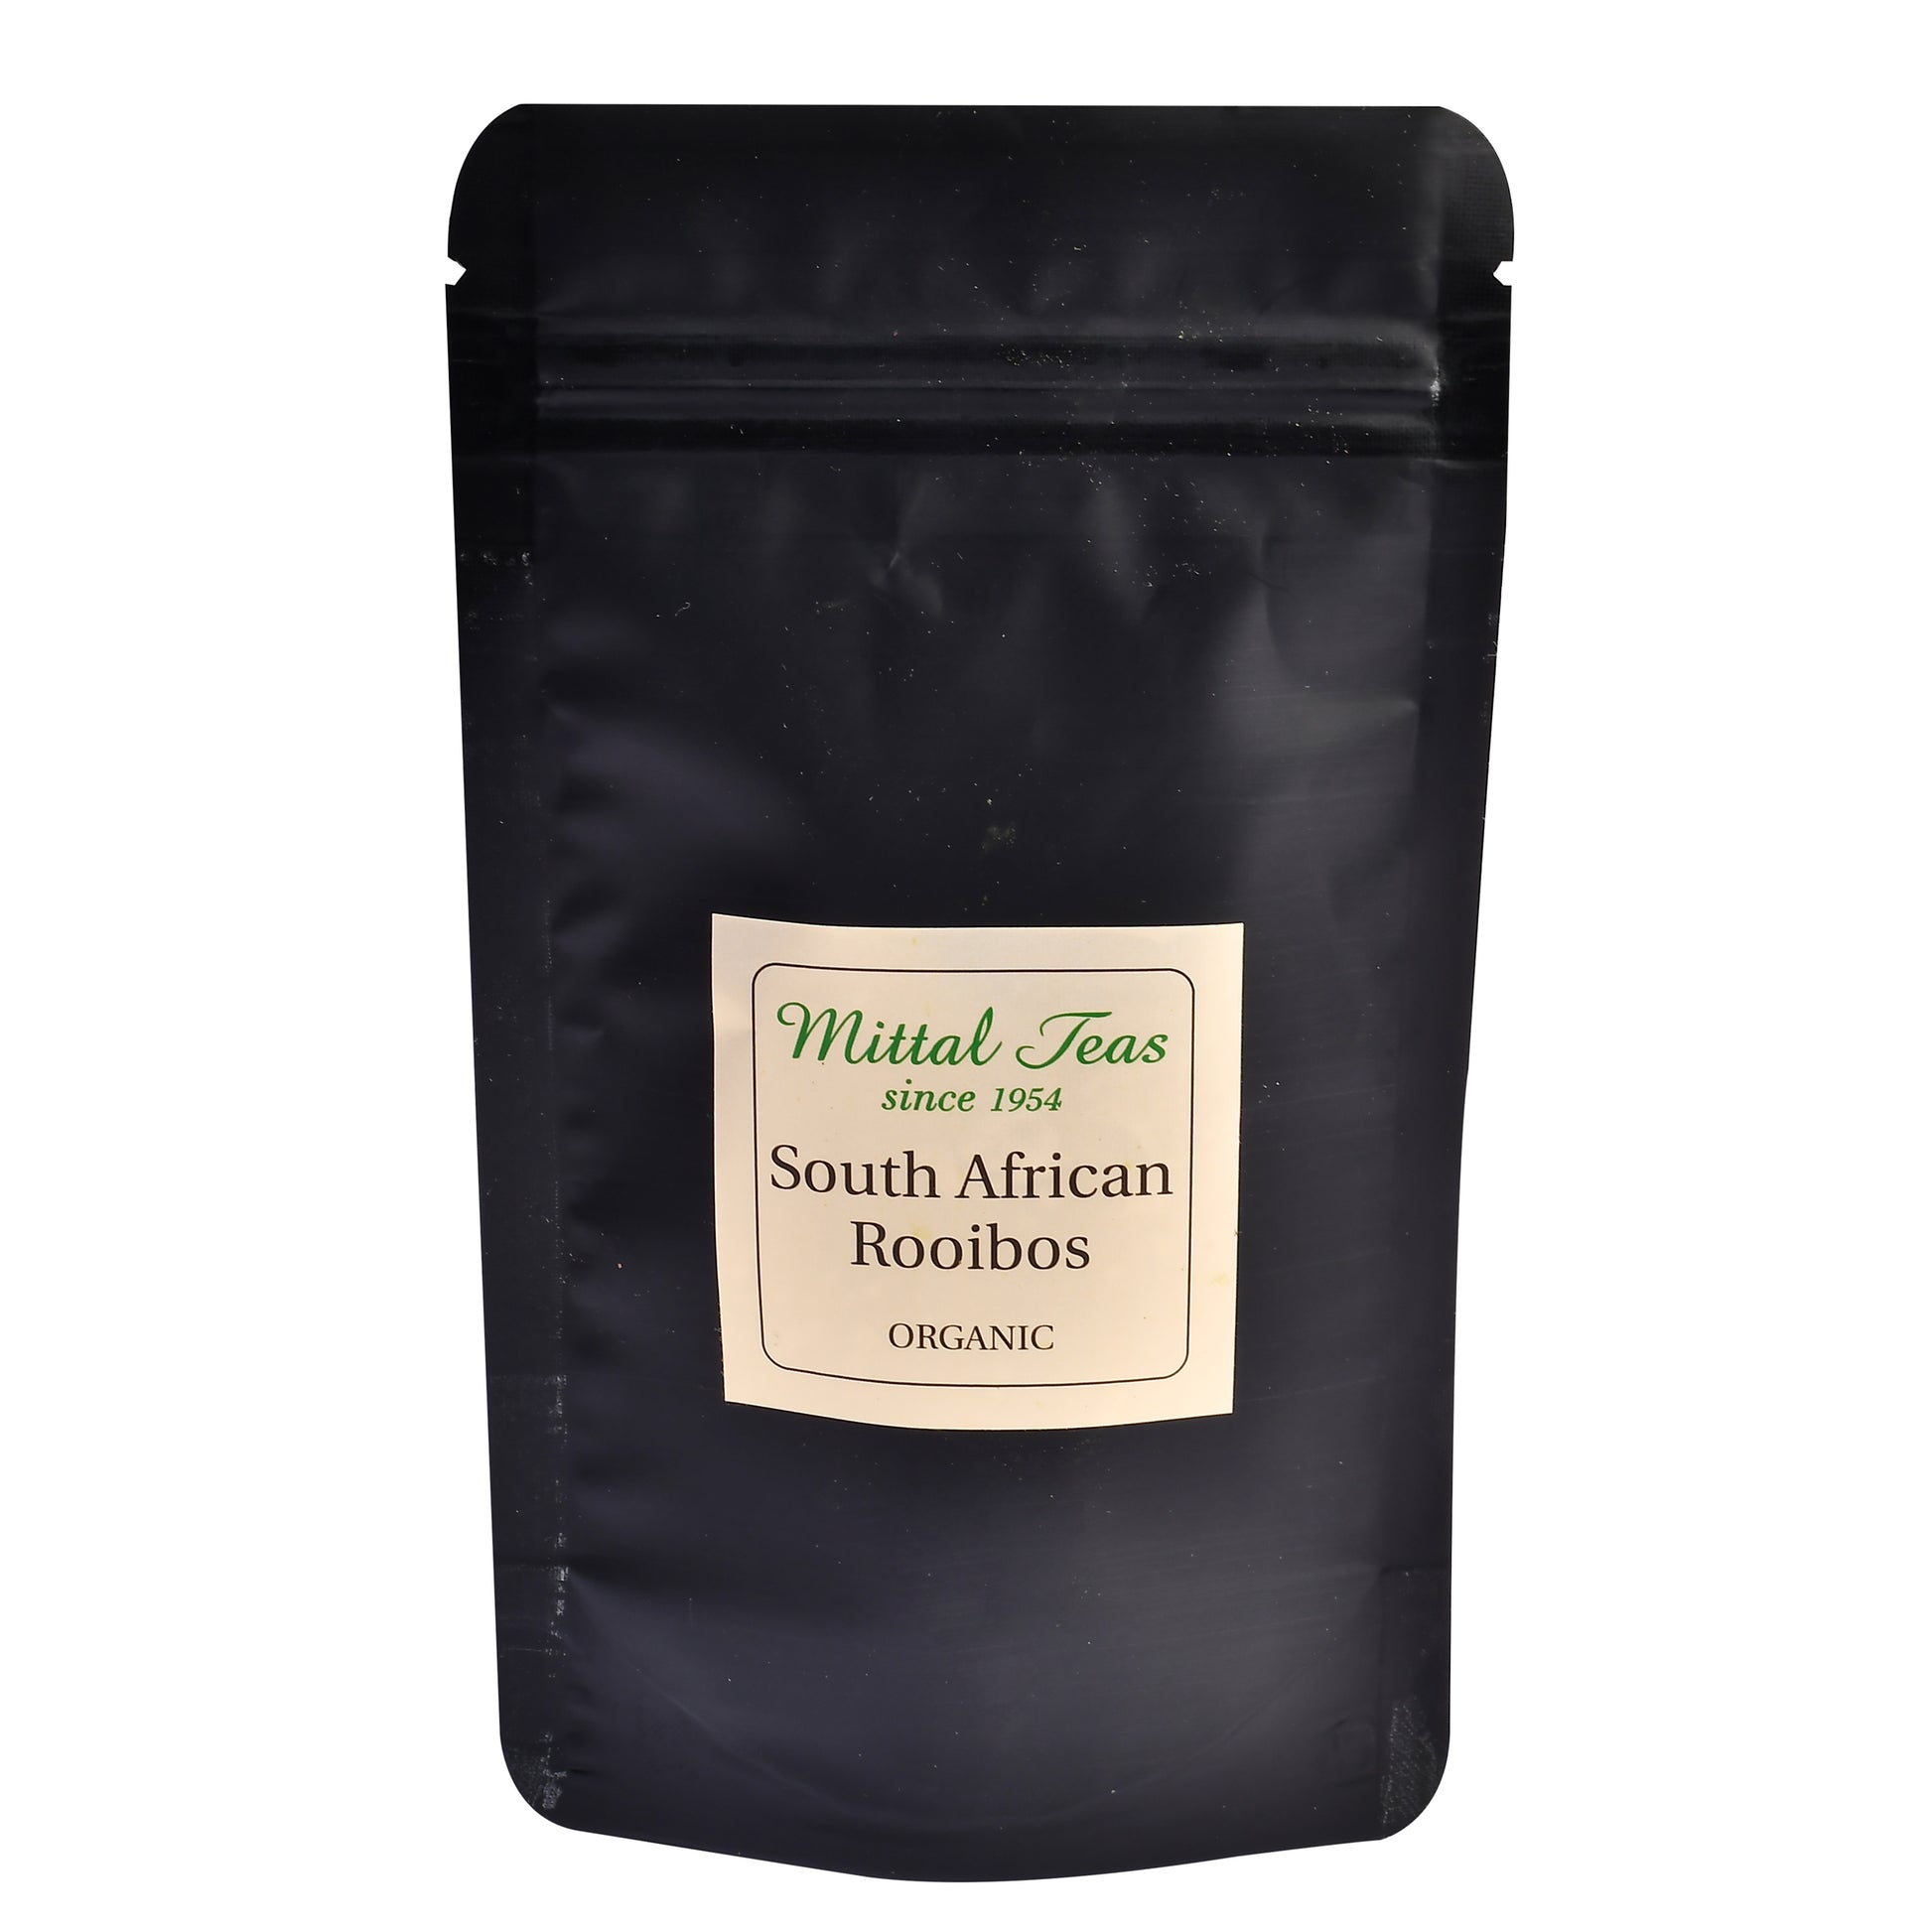 South African Rooibos. - Mittal Teas